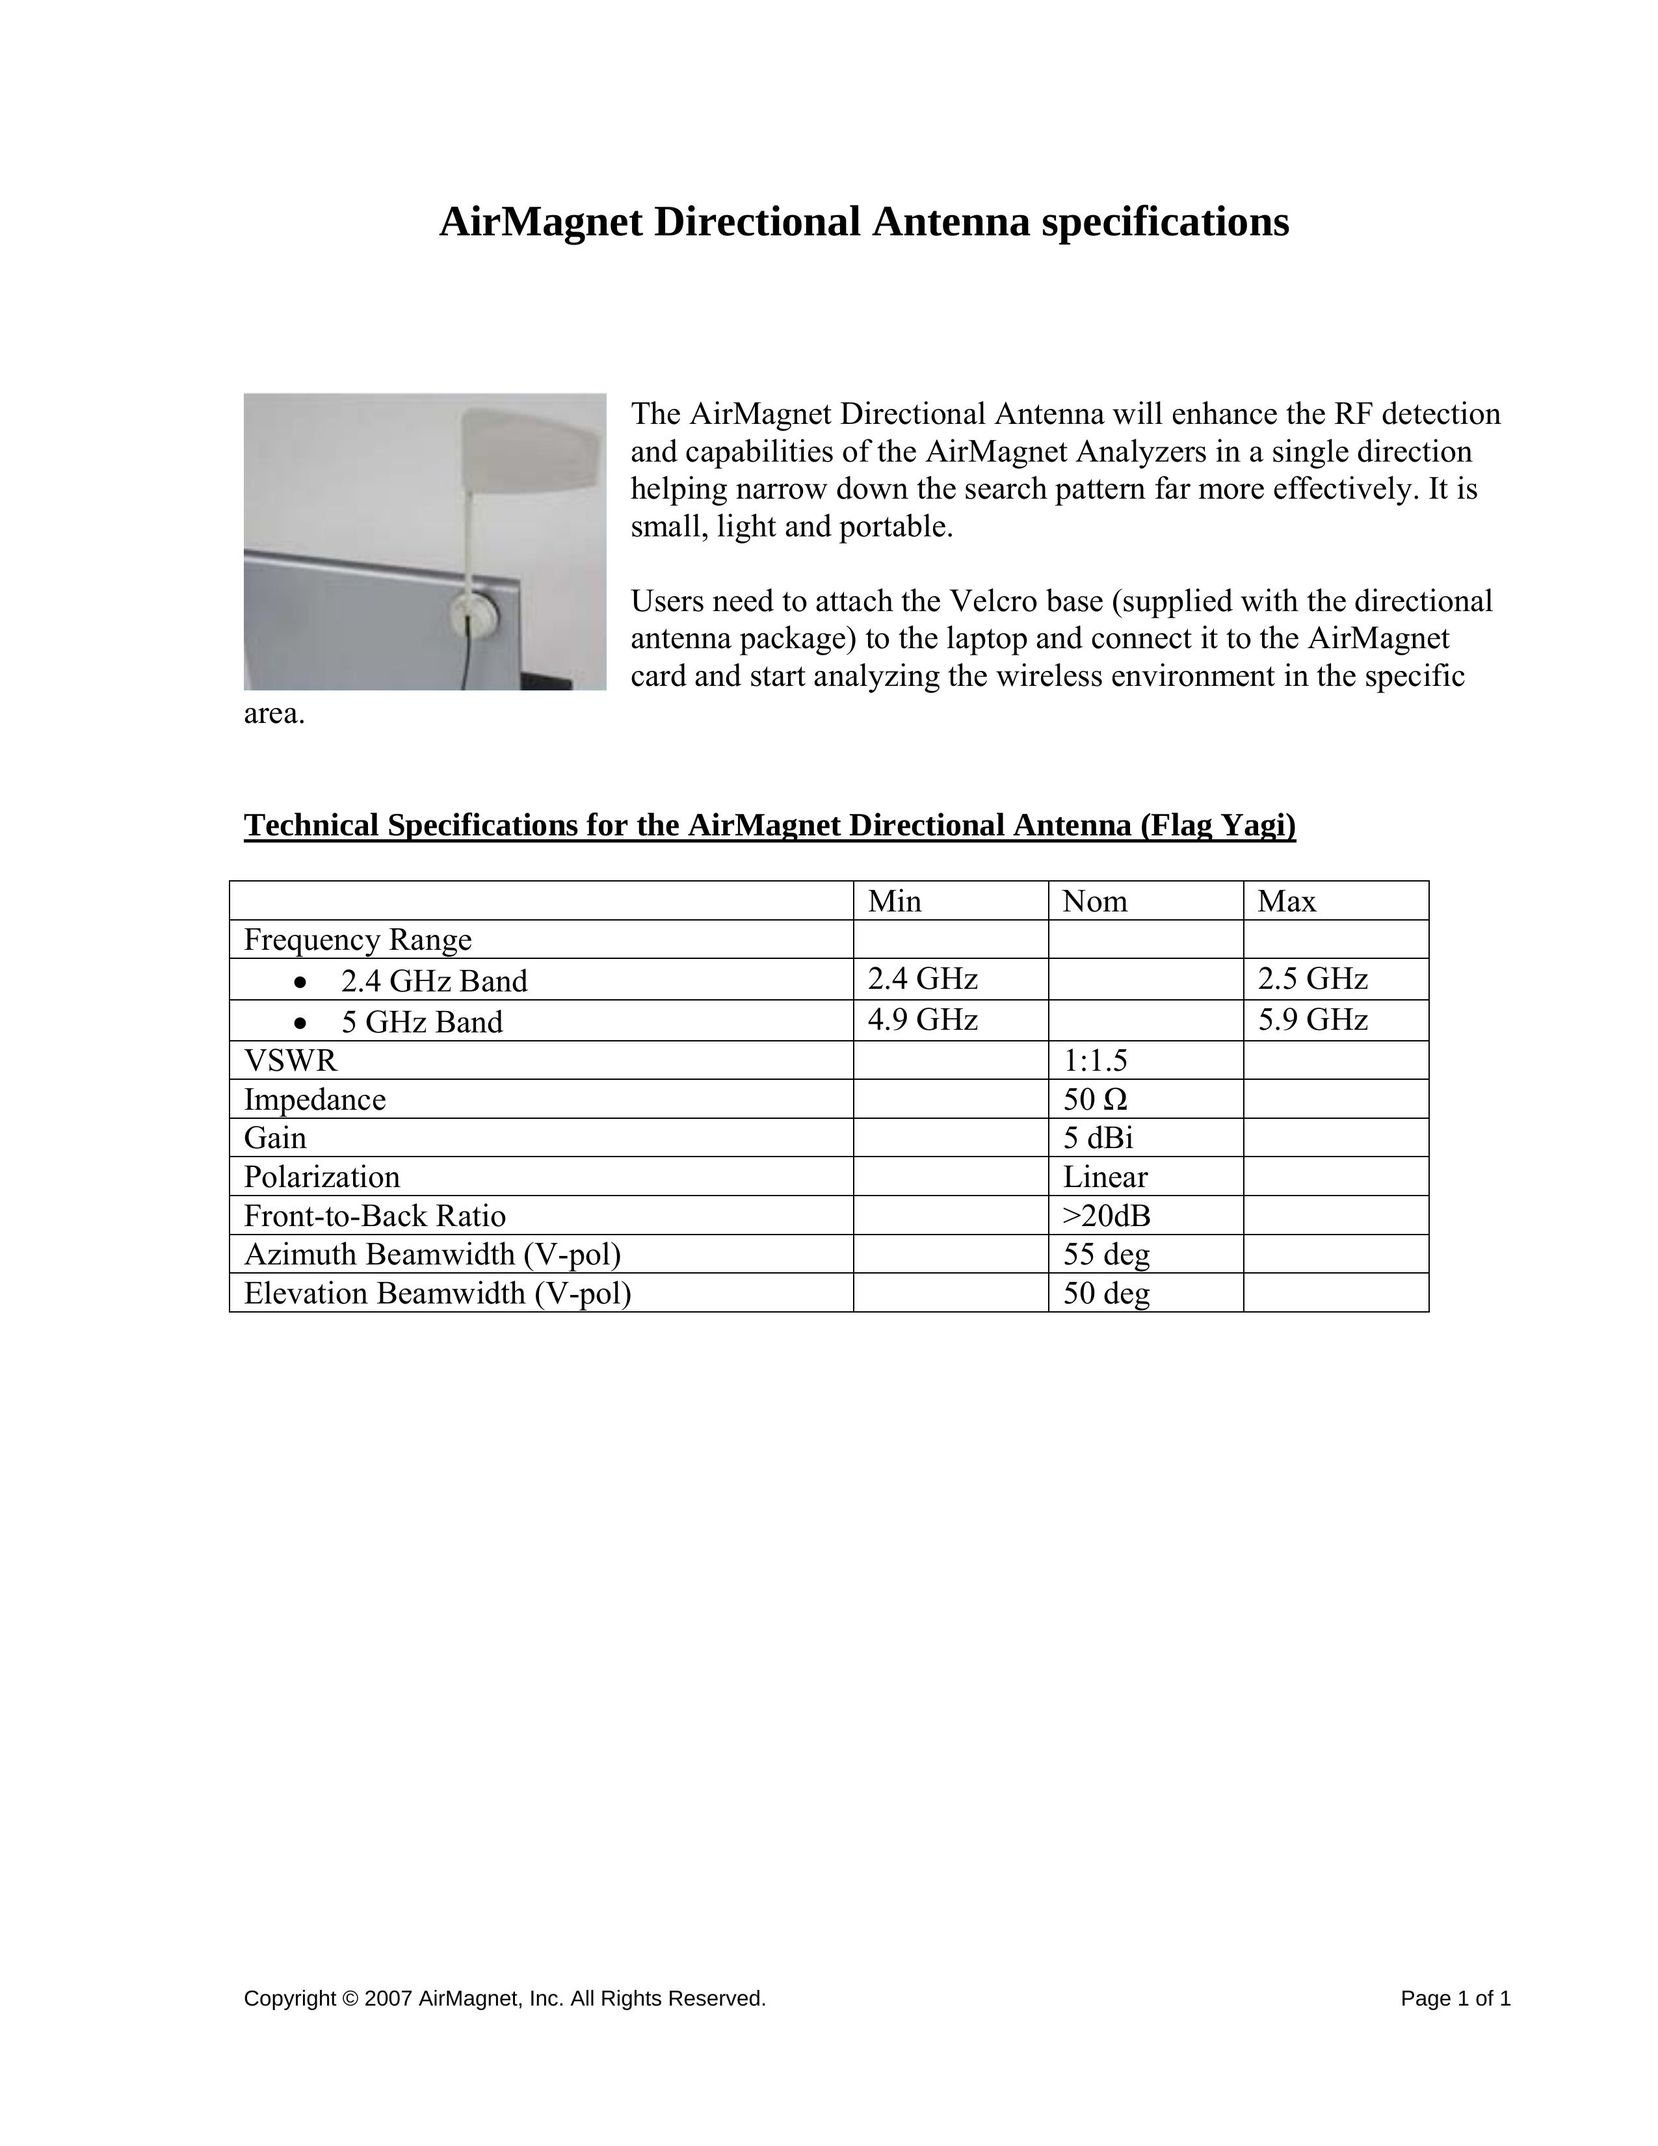 AirMagnet Directional Antenna Stereo System User Manual